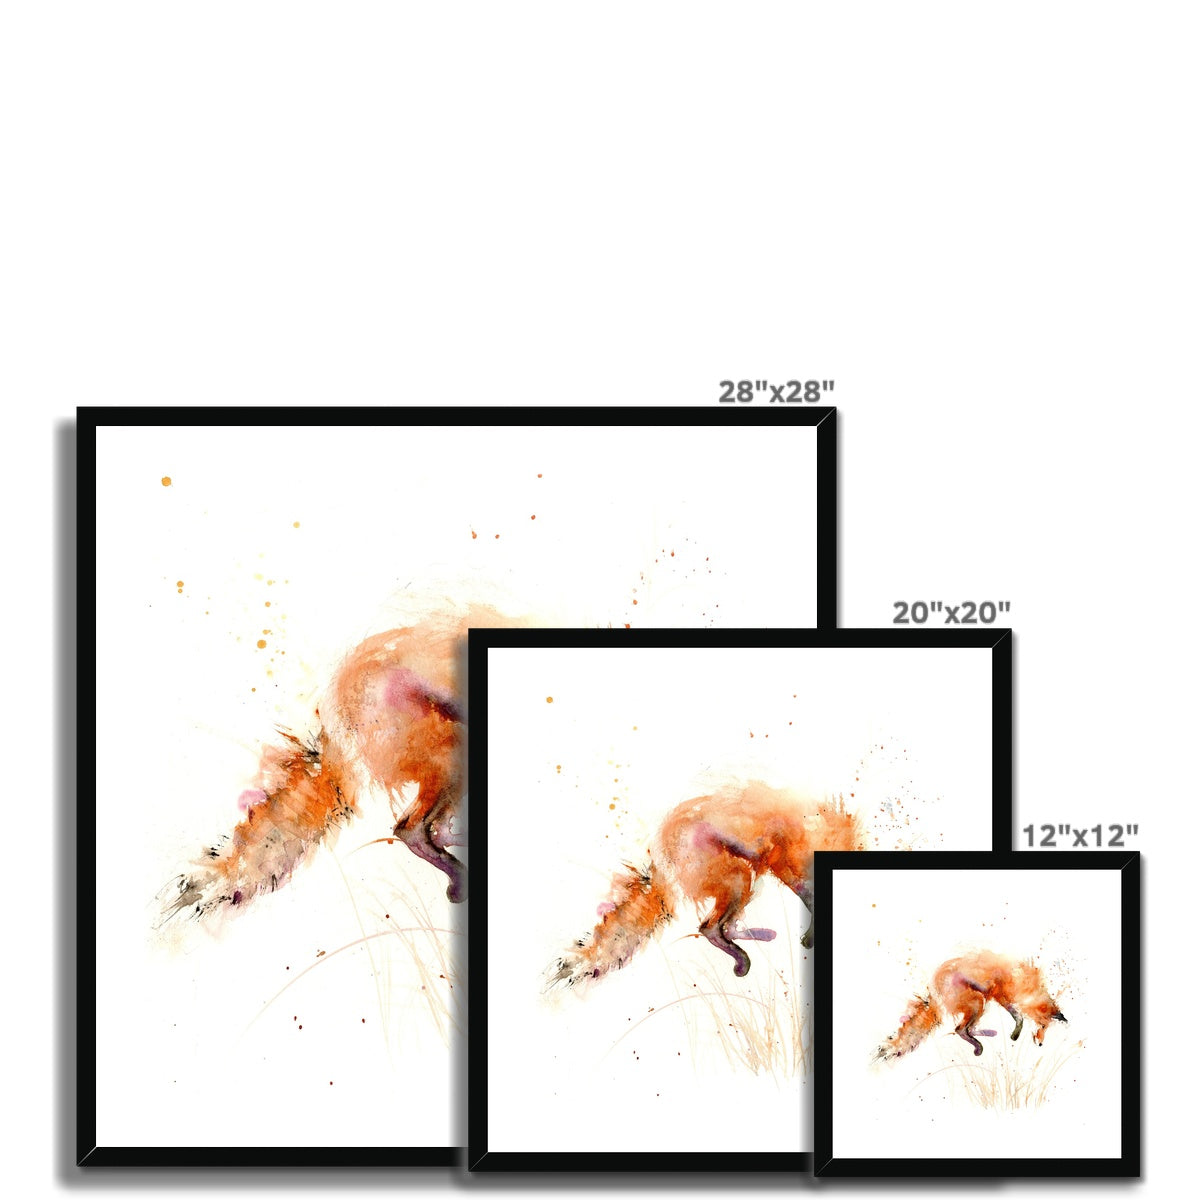 Leaping fox Framed & Mounted Print - Jen Buckley Art limited edition animal art prints